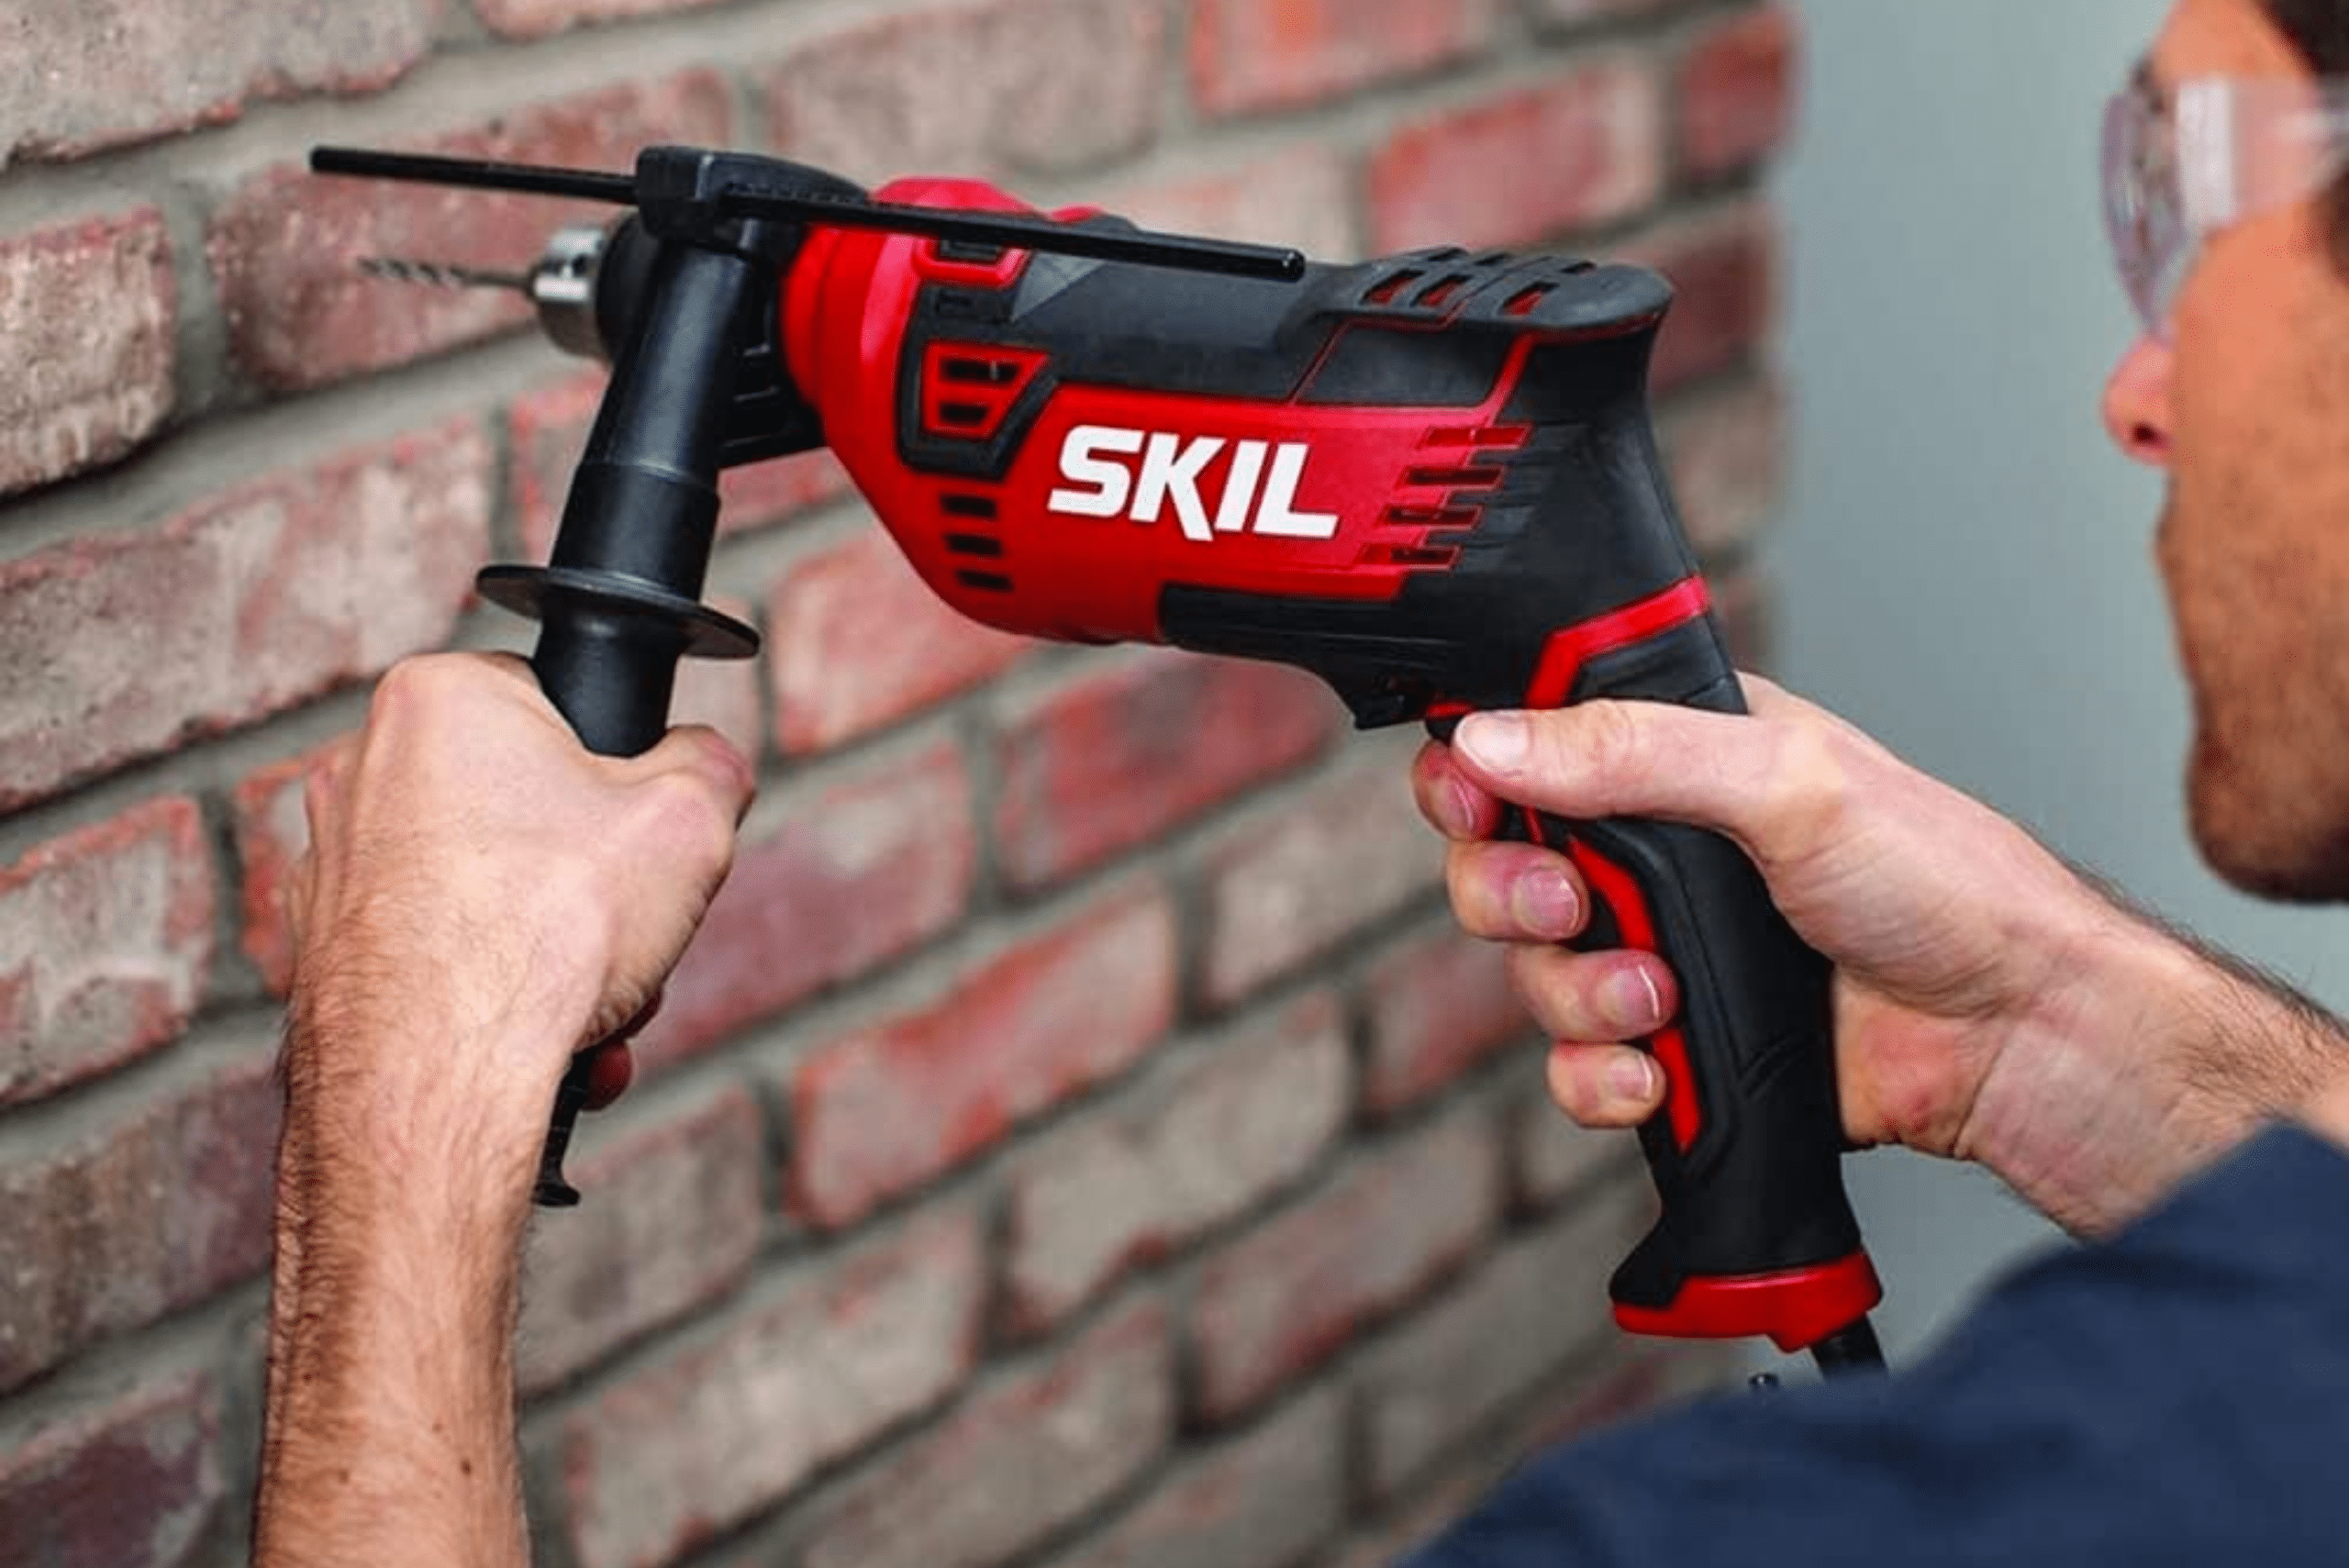 A Skil hammer drill being used on a red brick exterior wall.